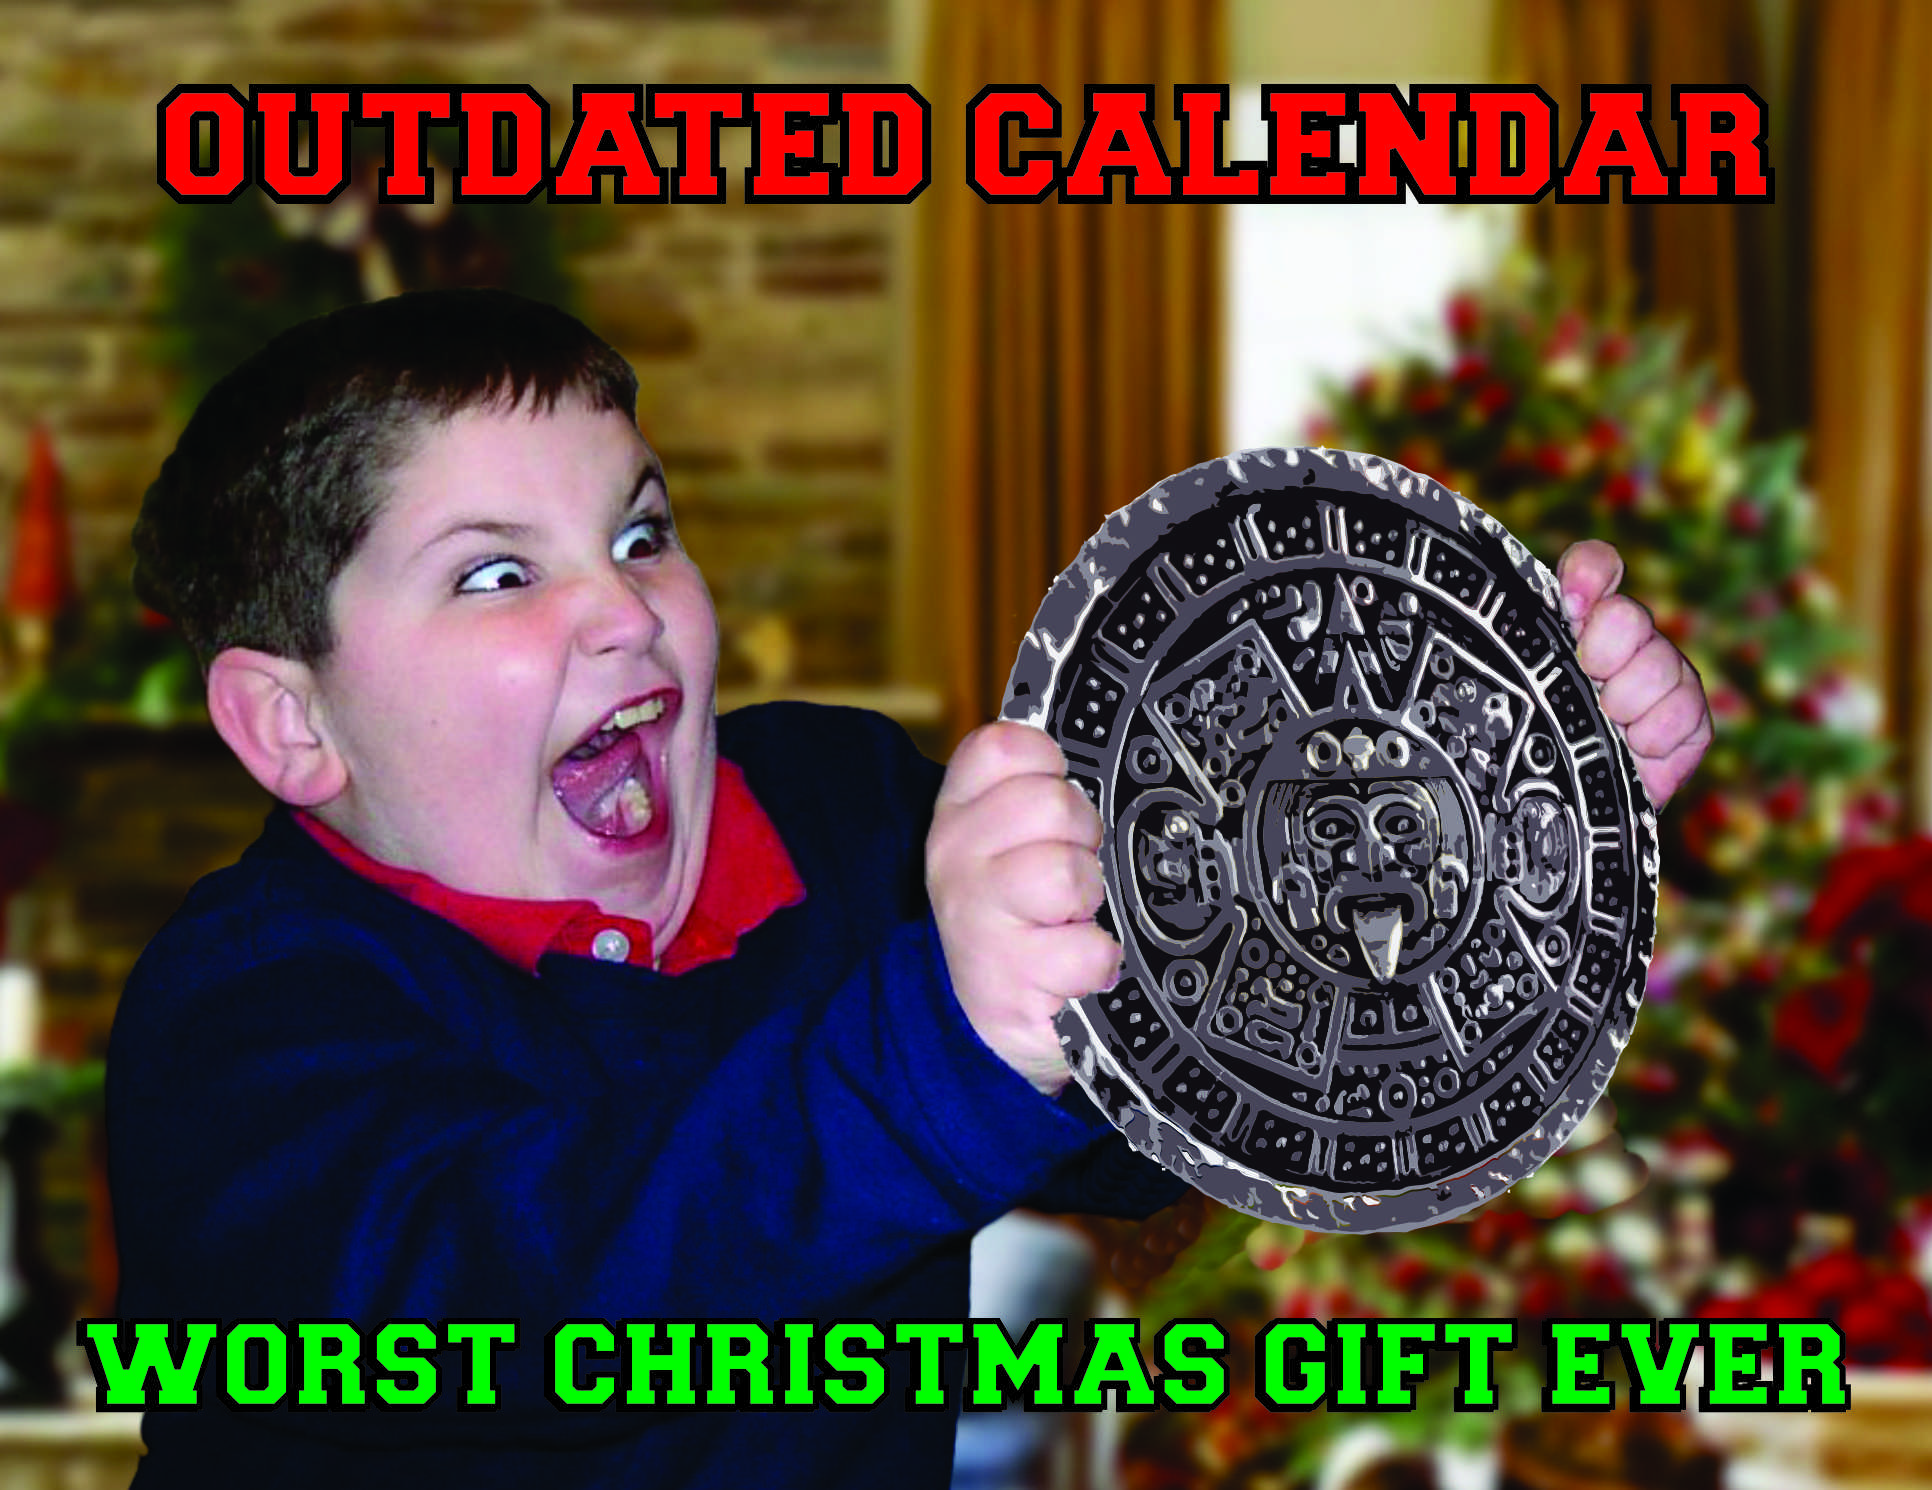 theatrical technician - Outdated Calendar 1. 8816 Tel . . Worst Christmas Gift Ever